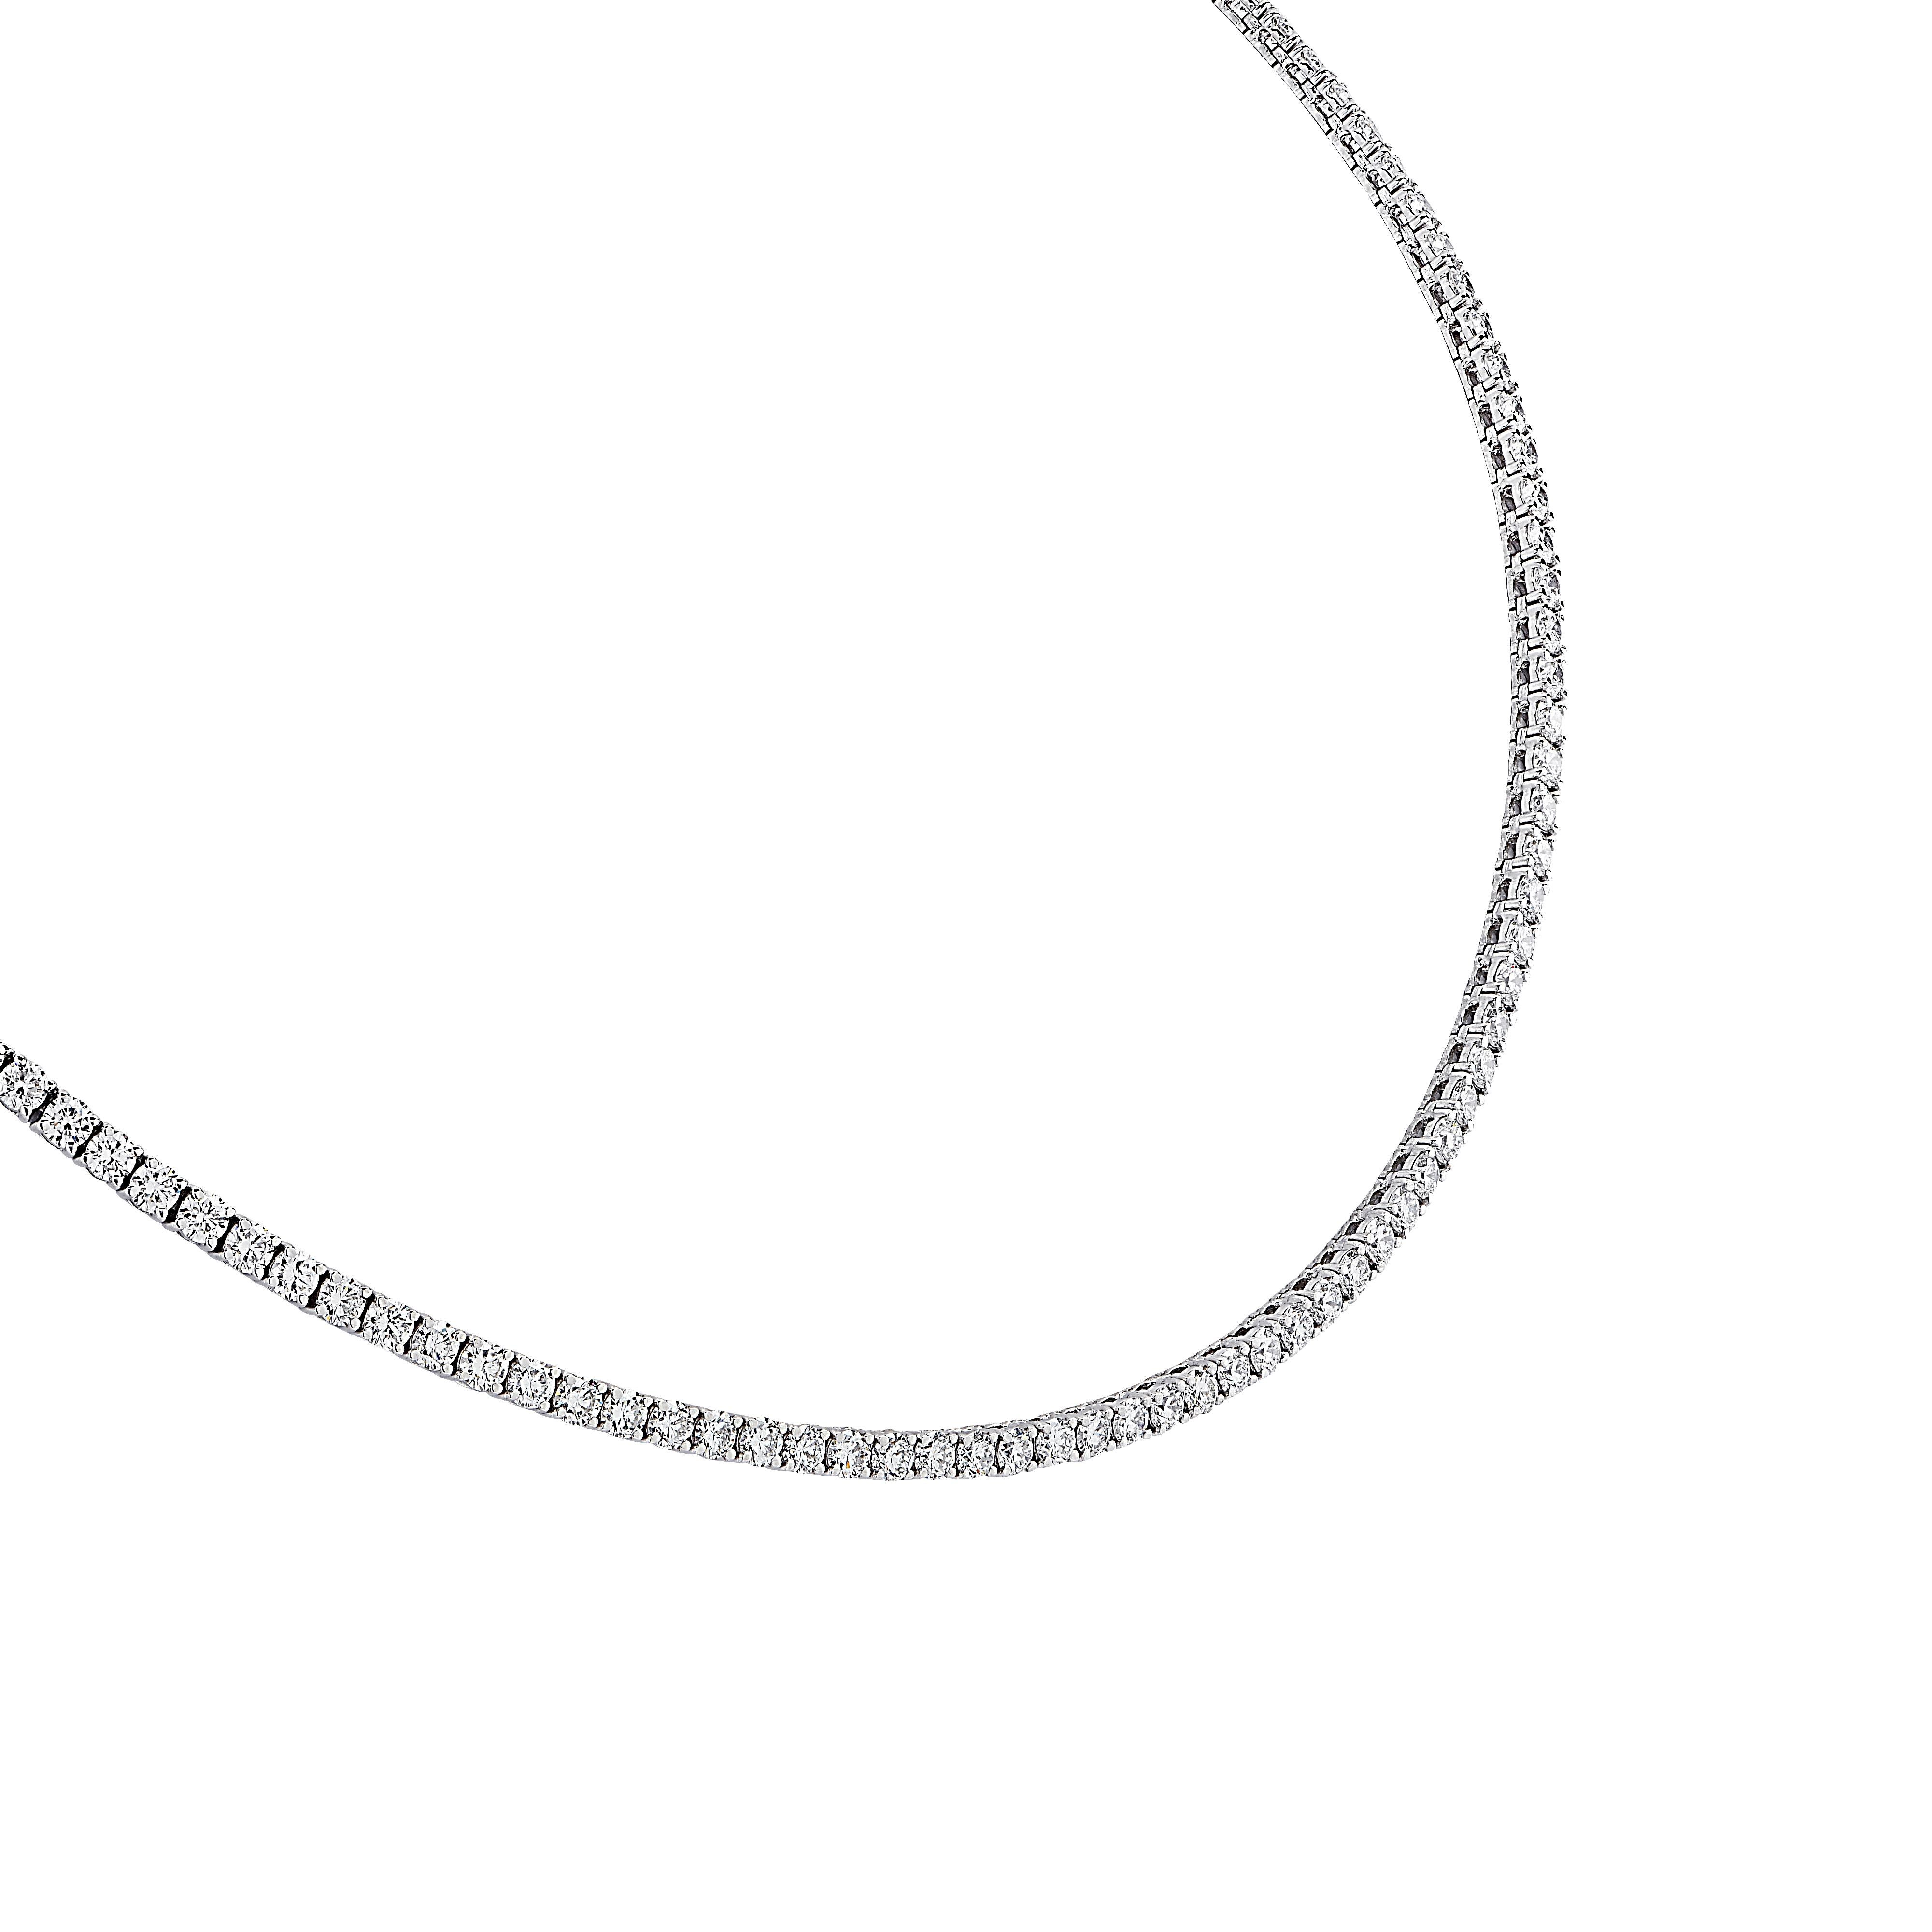 Exquisite Vivid Diamonds Straight Line diamond necklace crafted in 18 karat white gold, showcasing 140 round brilliant cut diamonds weighing 11.47 carats total, F-G color, VS Clarity. The diamonds are set in a seamless sea of eternity, creating a